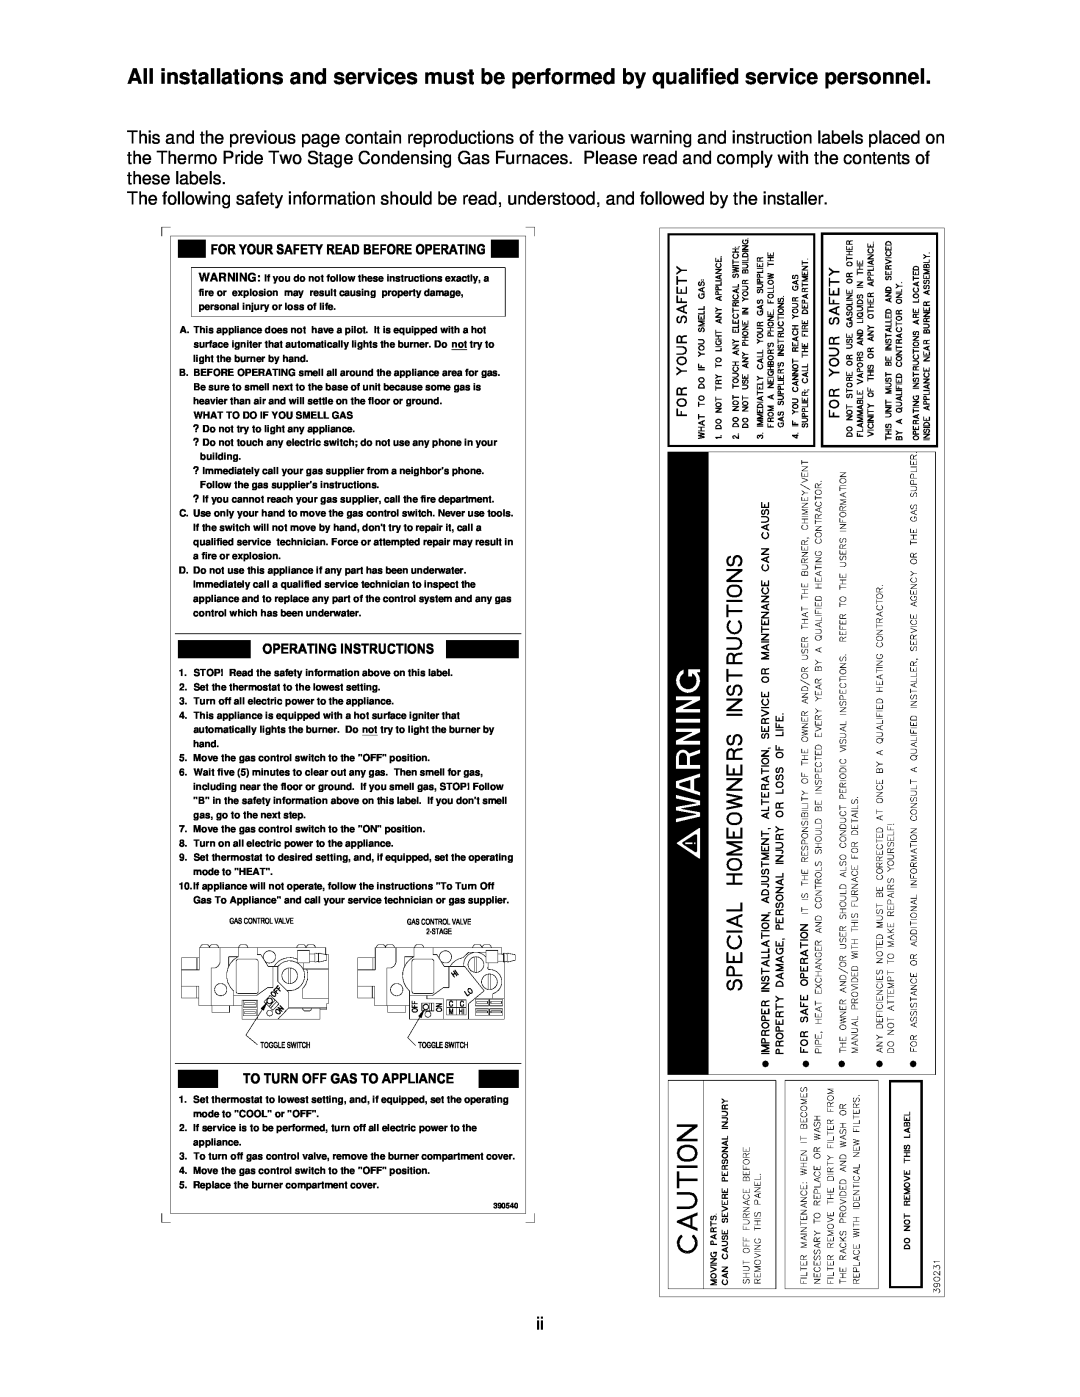 Thermo Products chx-3 75n, 100n, 125n operation manual 